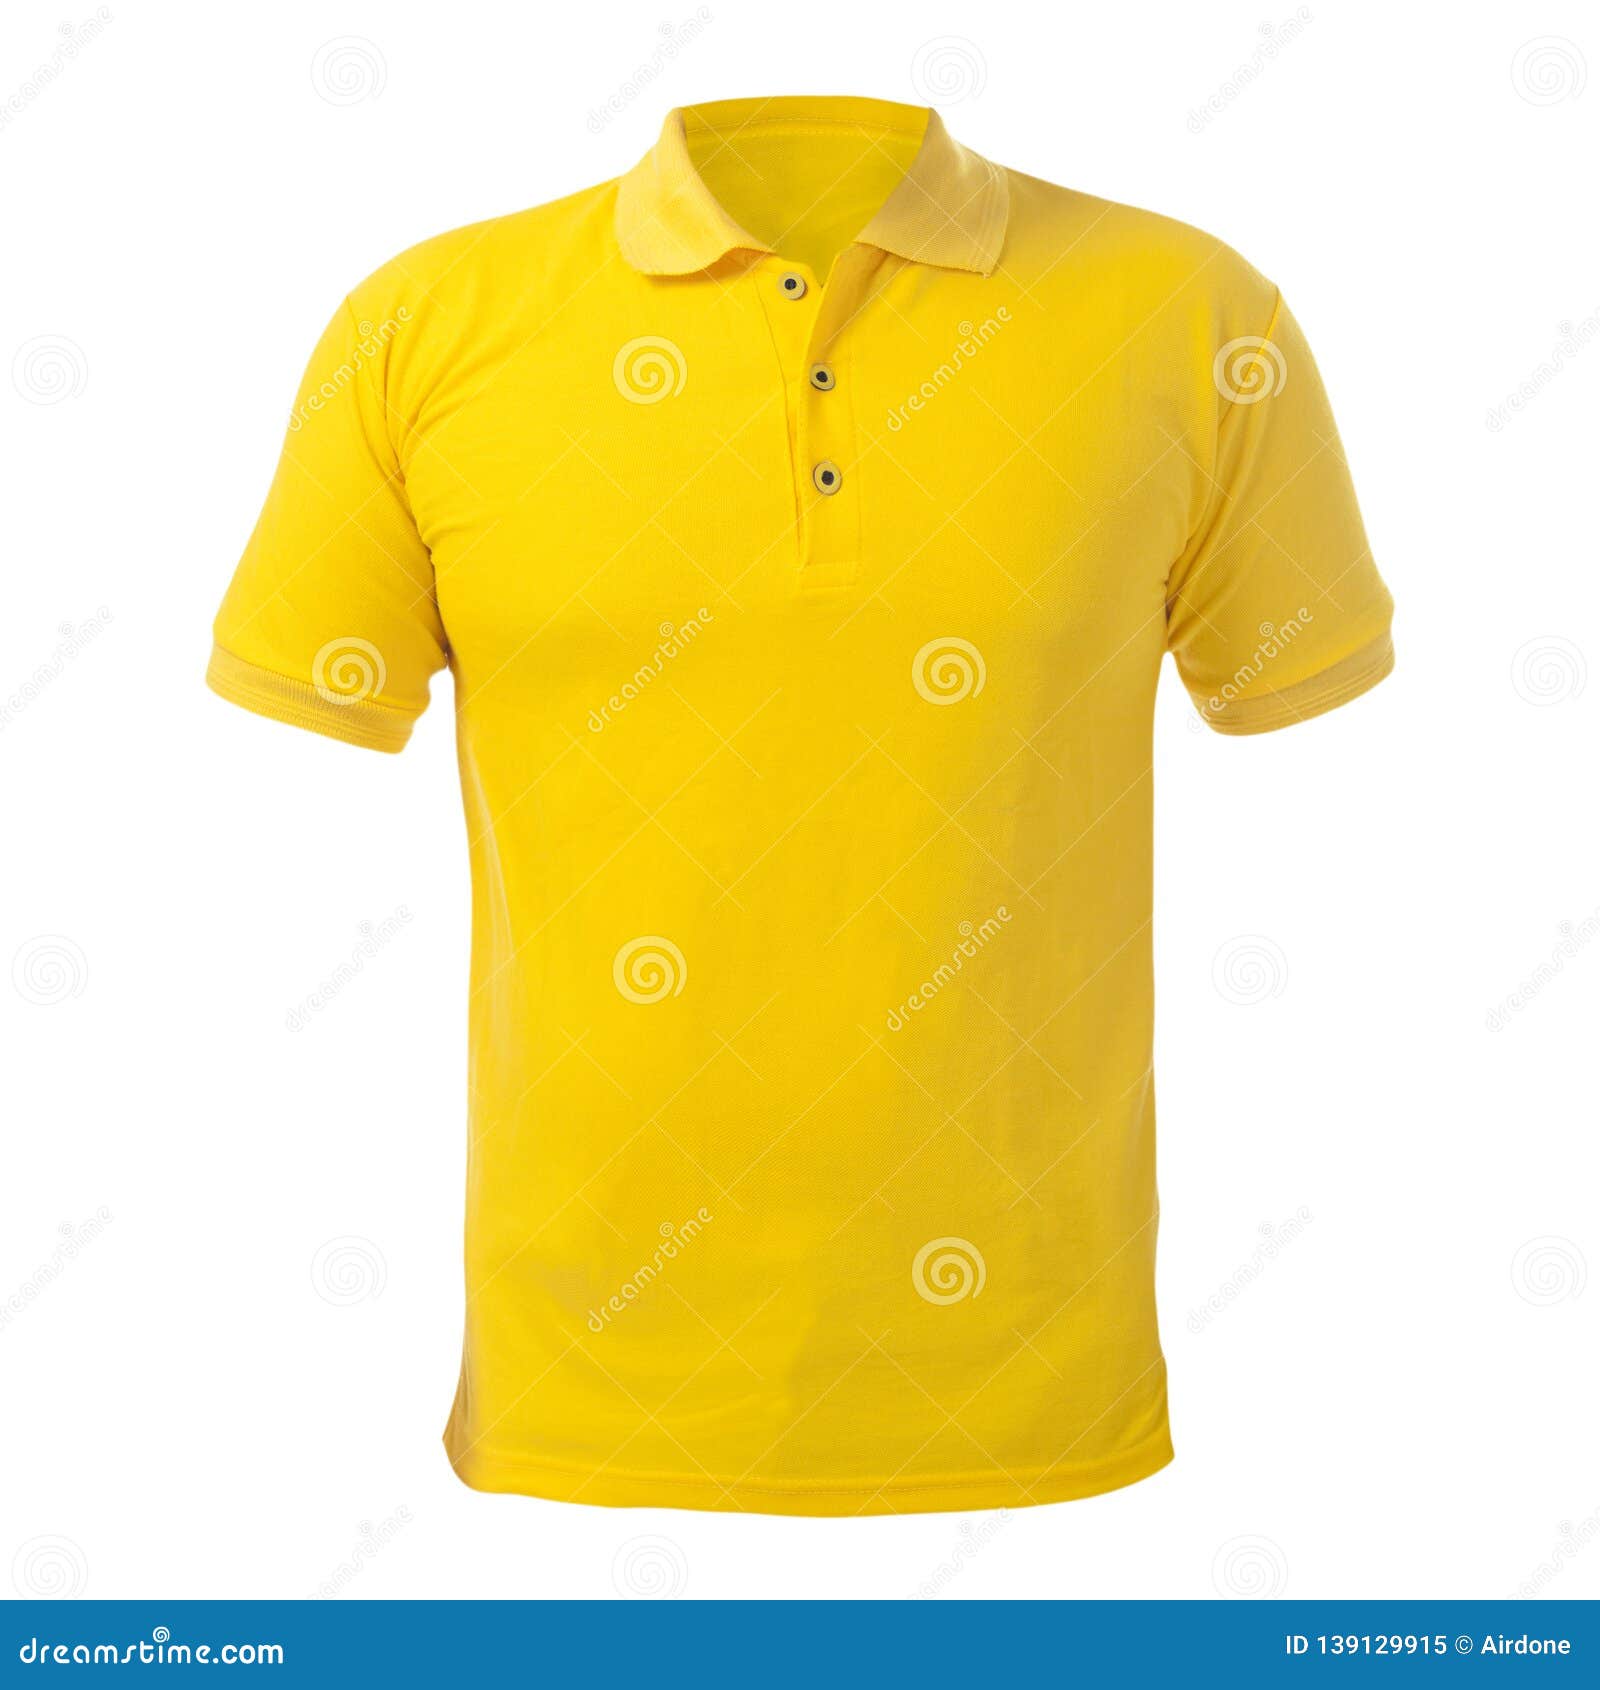 Download 142 Polo Shirt Template Yellow Photos Free Royalty Free Stock Photos From Dreamstime PSD Mockup Templates